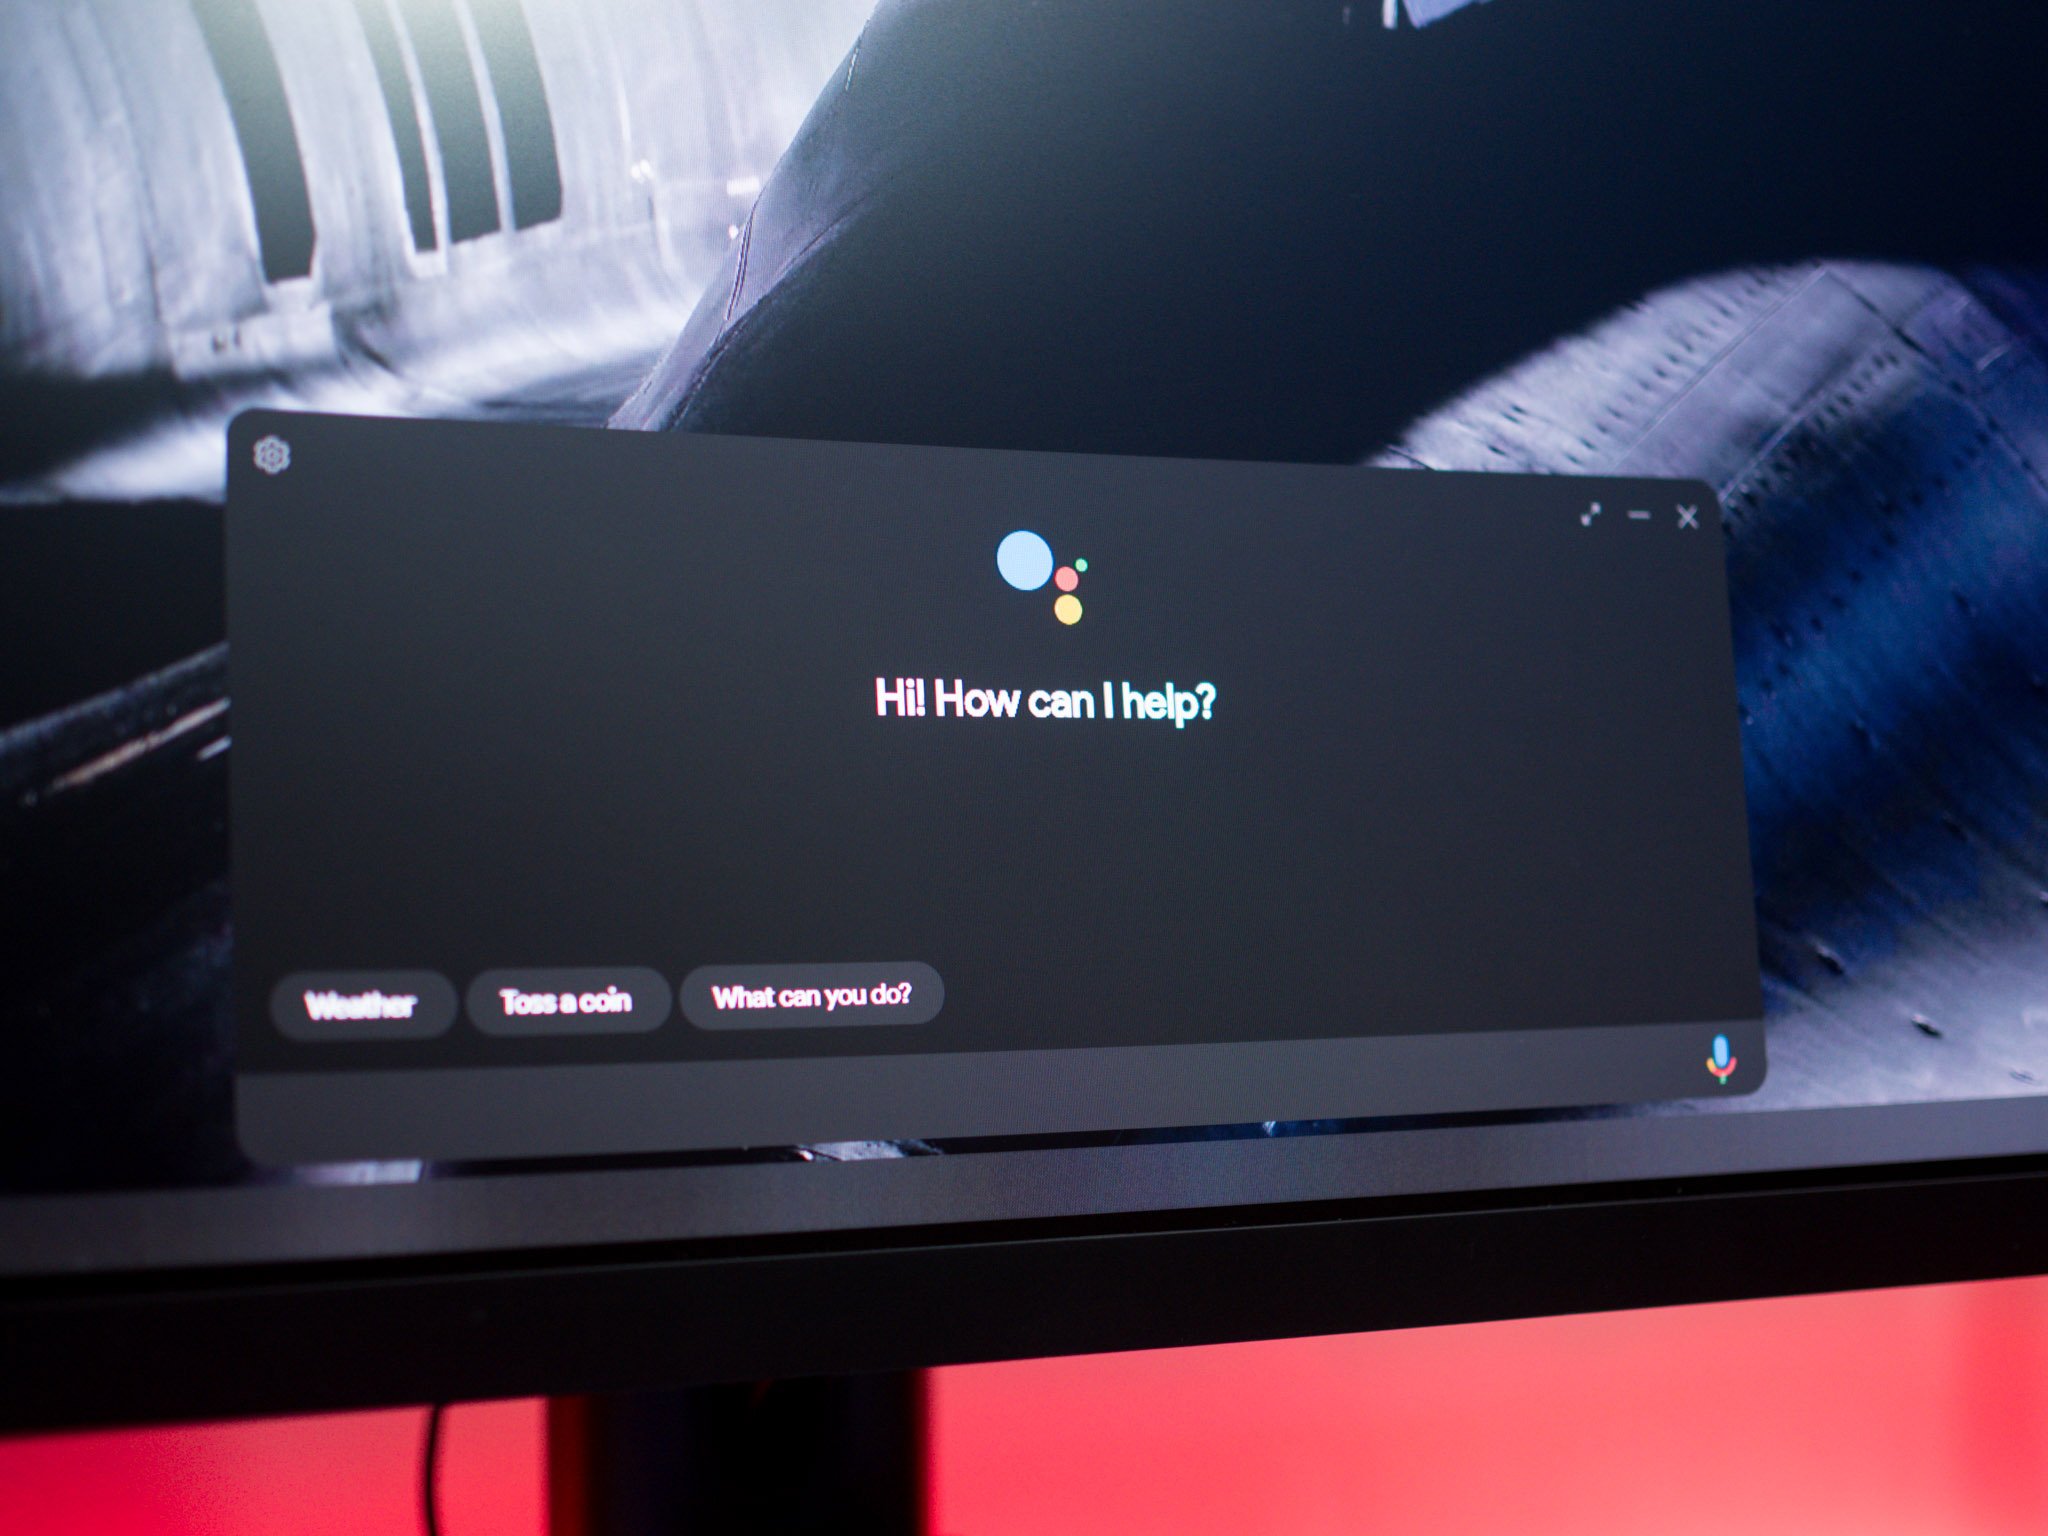 You can now use Google Assistant on Windows 10, but there's a catch